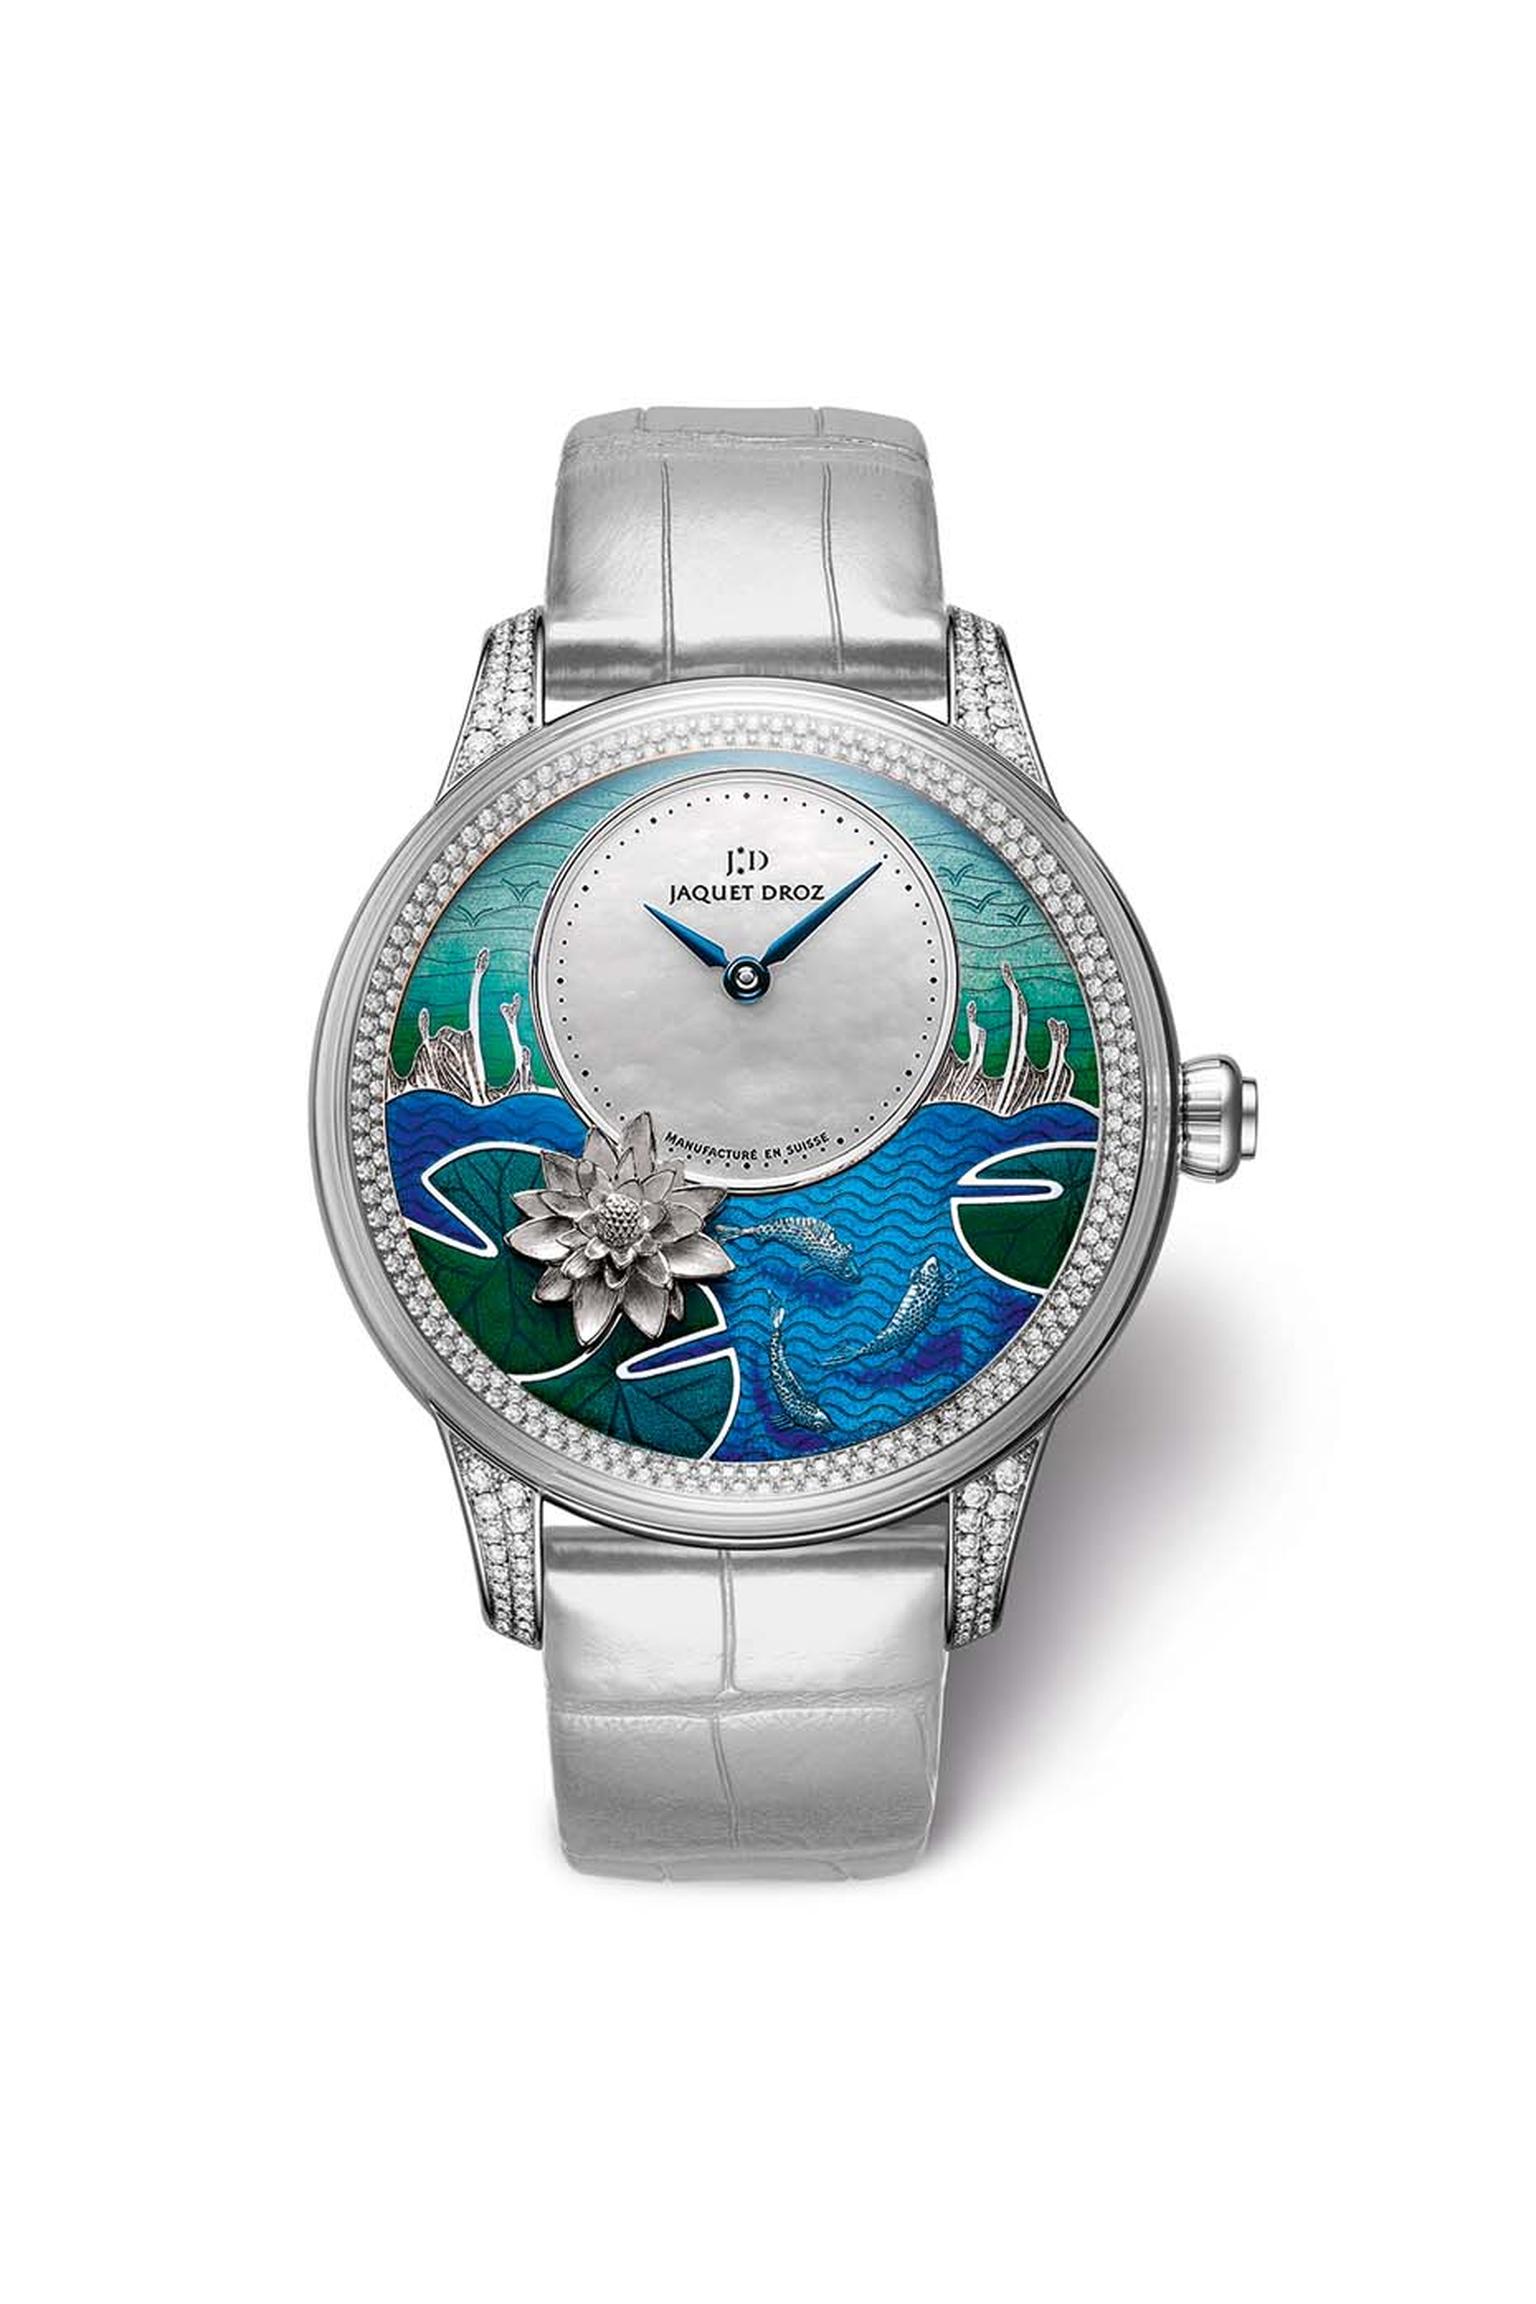 The Jaquet Droz Petite Heure Minute Carps watch paints a lovely Asian-inspired scene of Koi carp frolicking in the water with a lotus flower and bulrushes in the background. The skills of the artisans behind the exquisite enamelling and engraving work bri